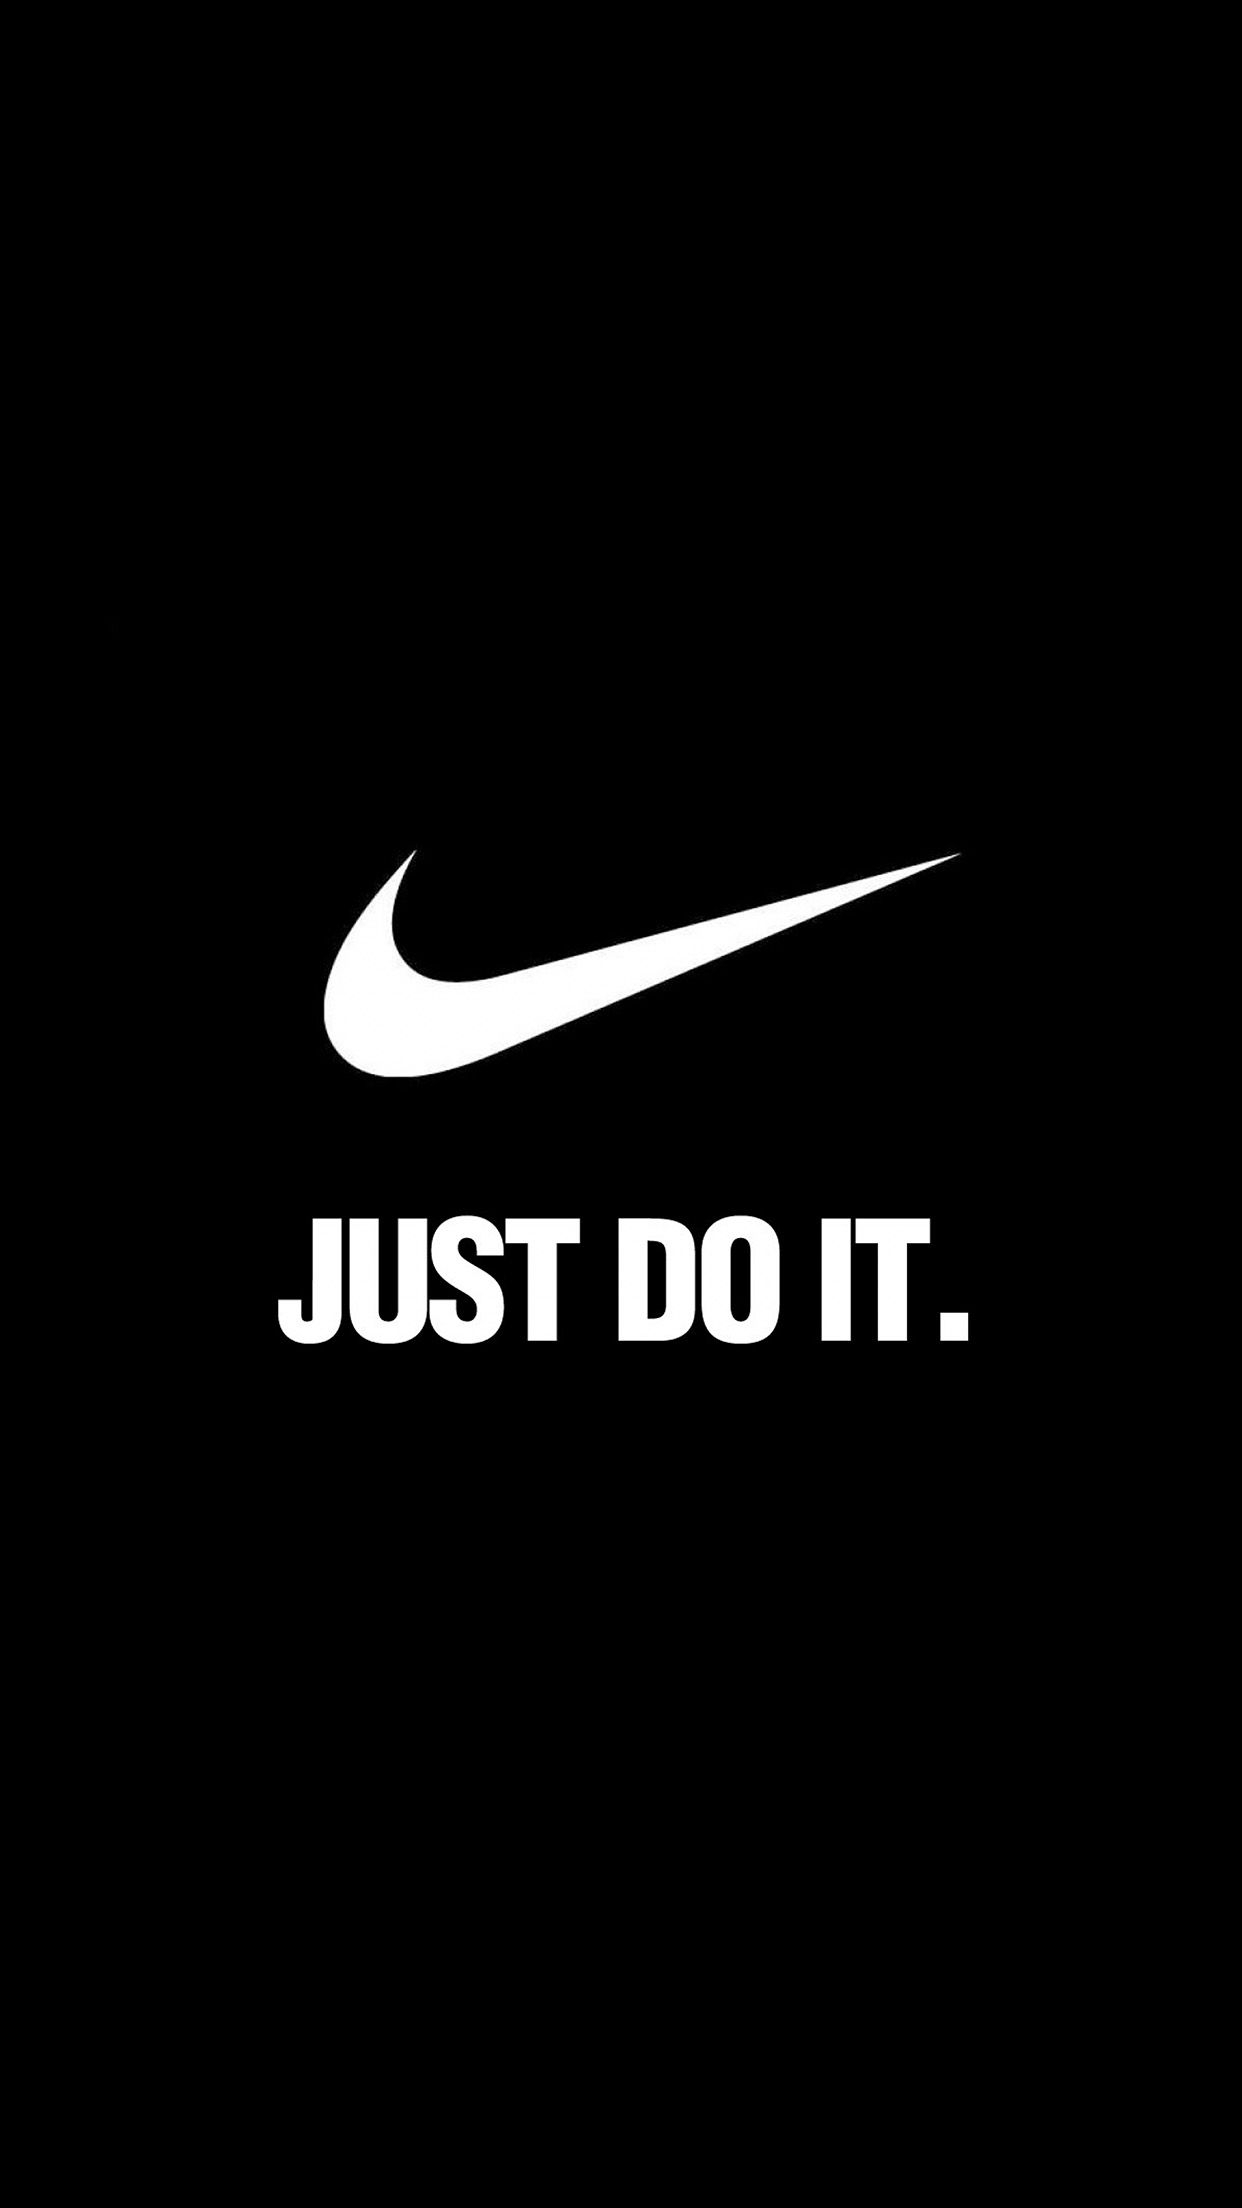 10 Best Just Do It Iphone Wallpaper FULL HD 1920×1080 For PC Background